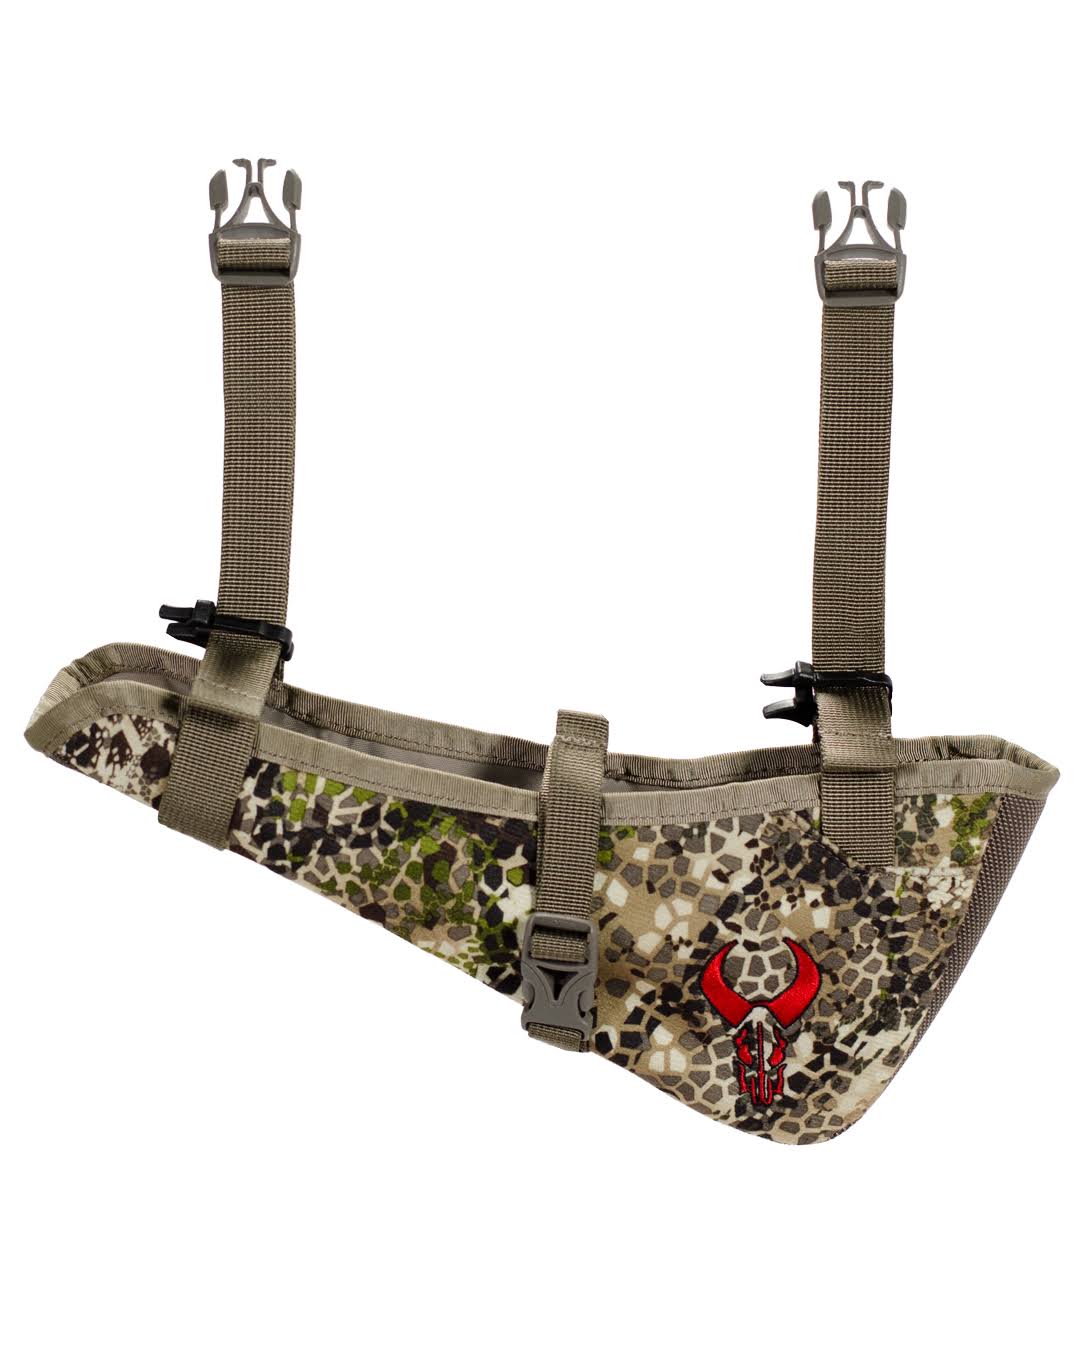 Badlands Bow Boot Holder - Approach Camo